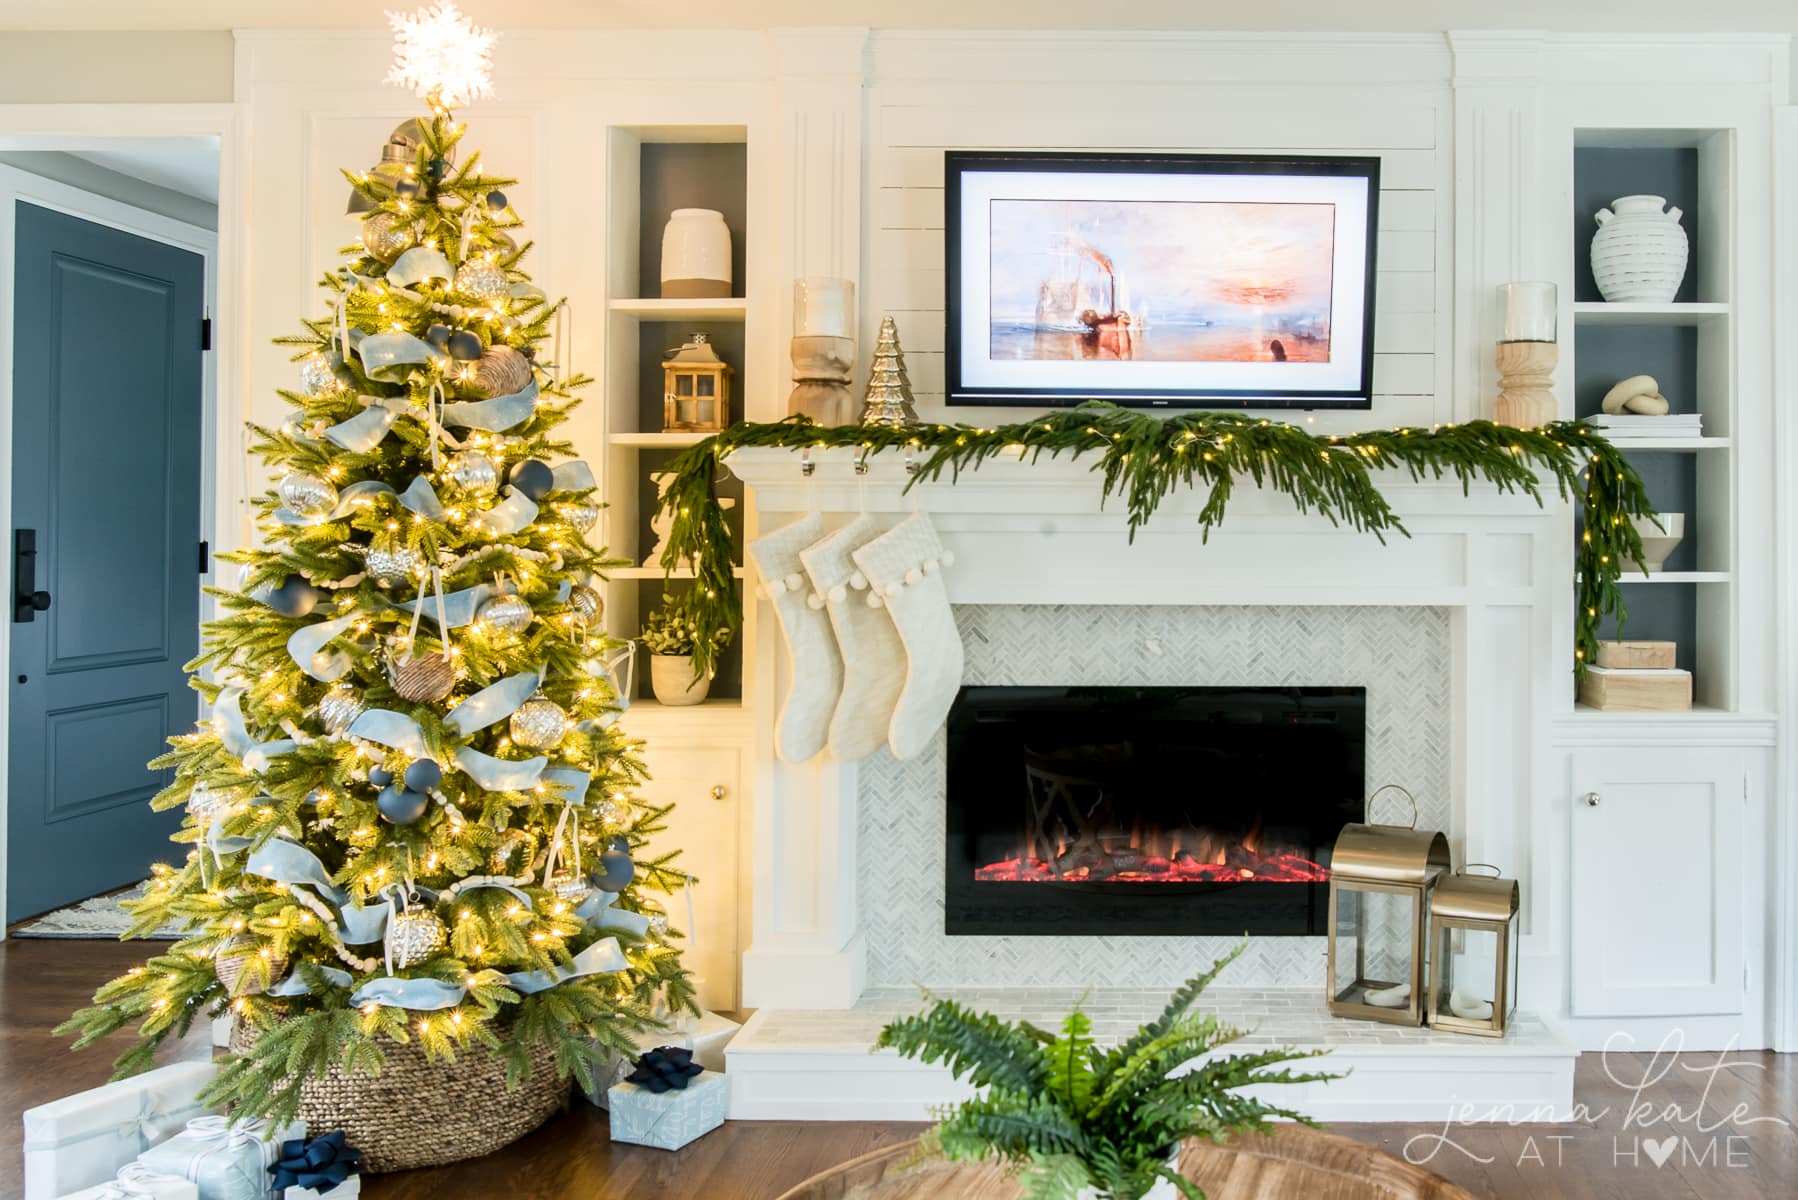 Christmas tree with blue ornaments and ribbon in living room